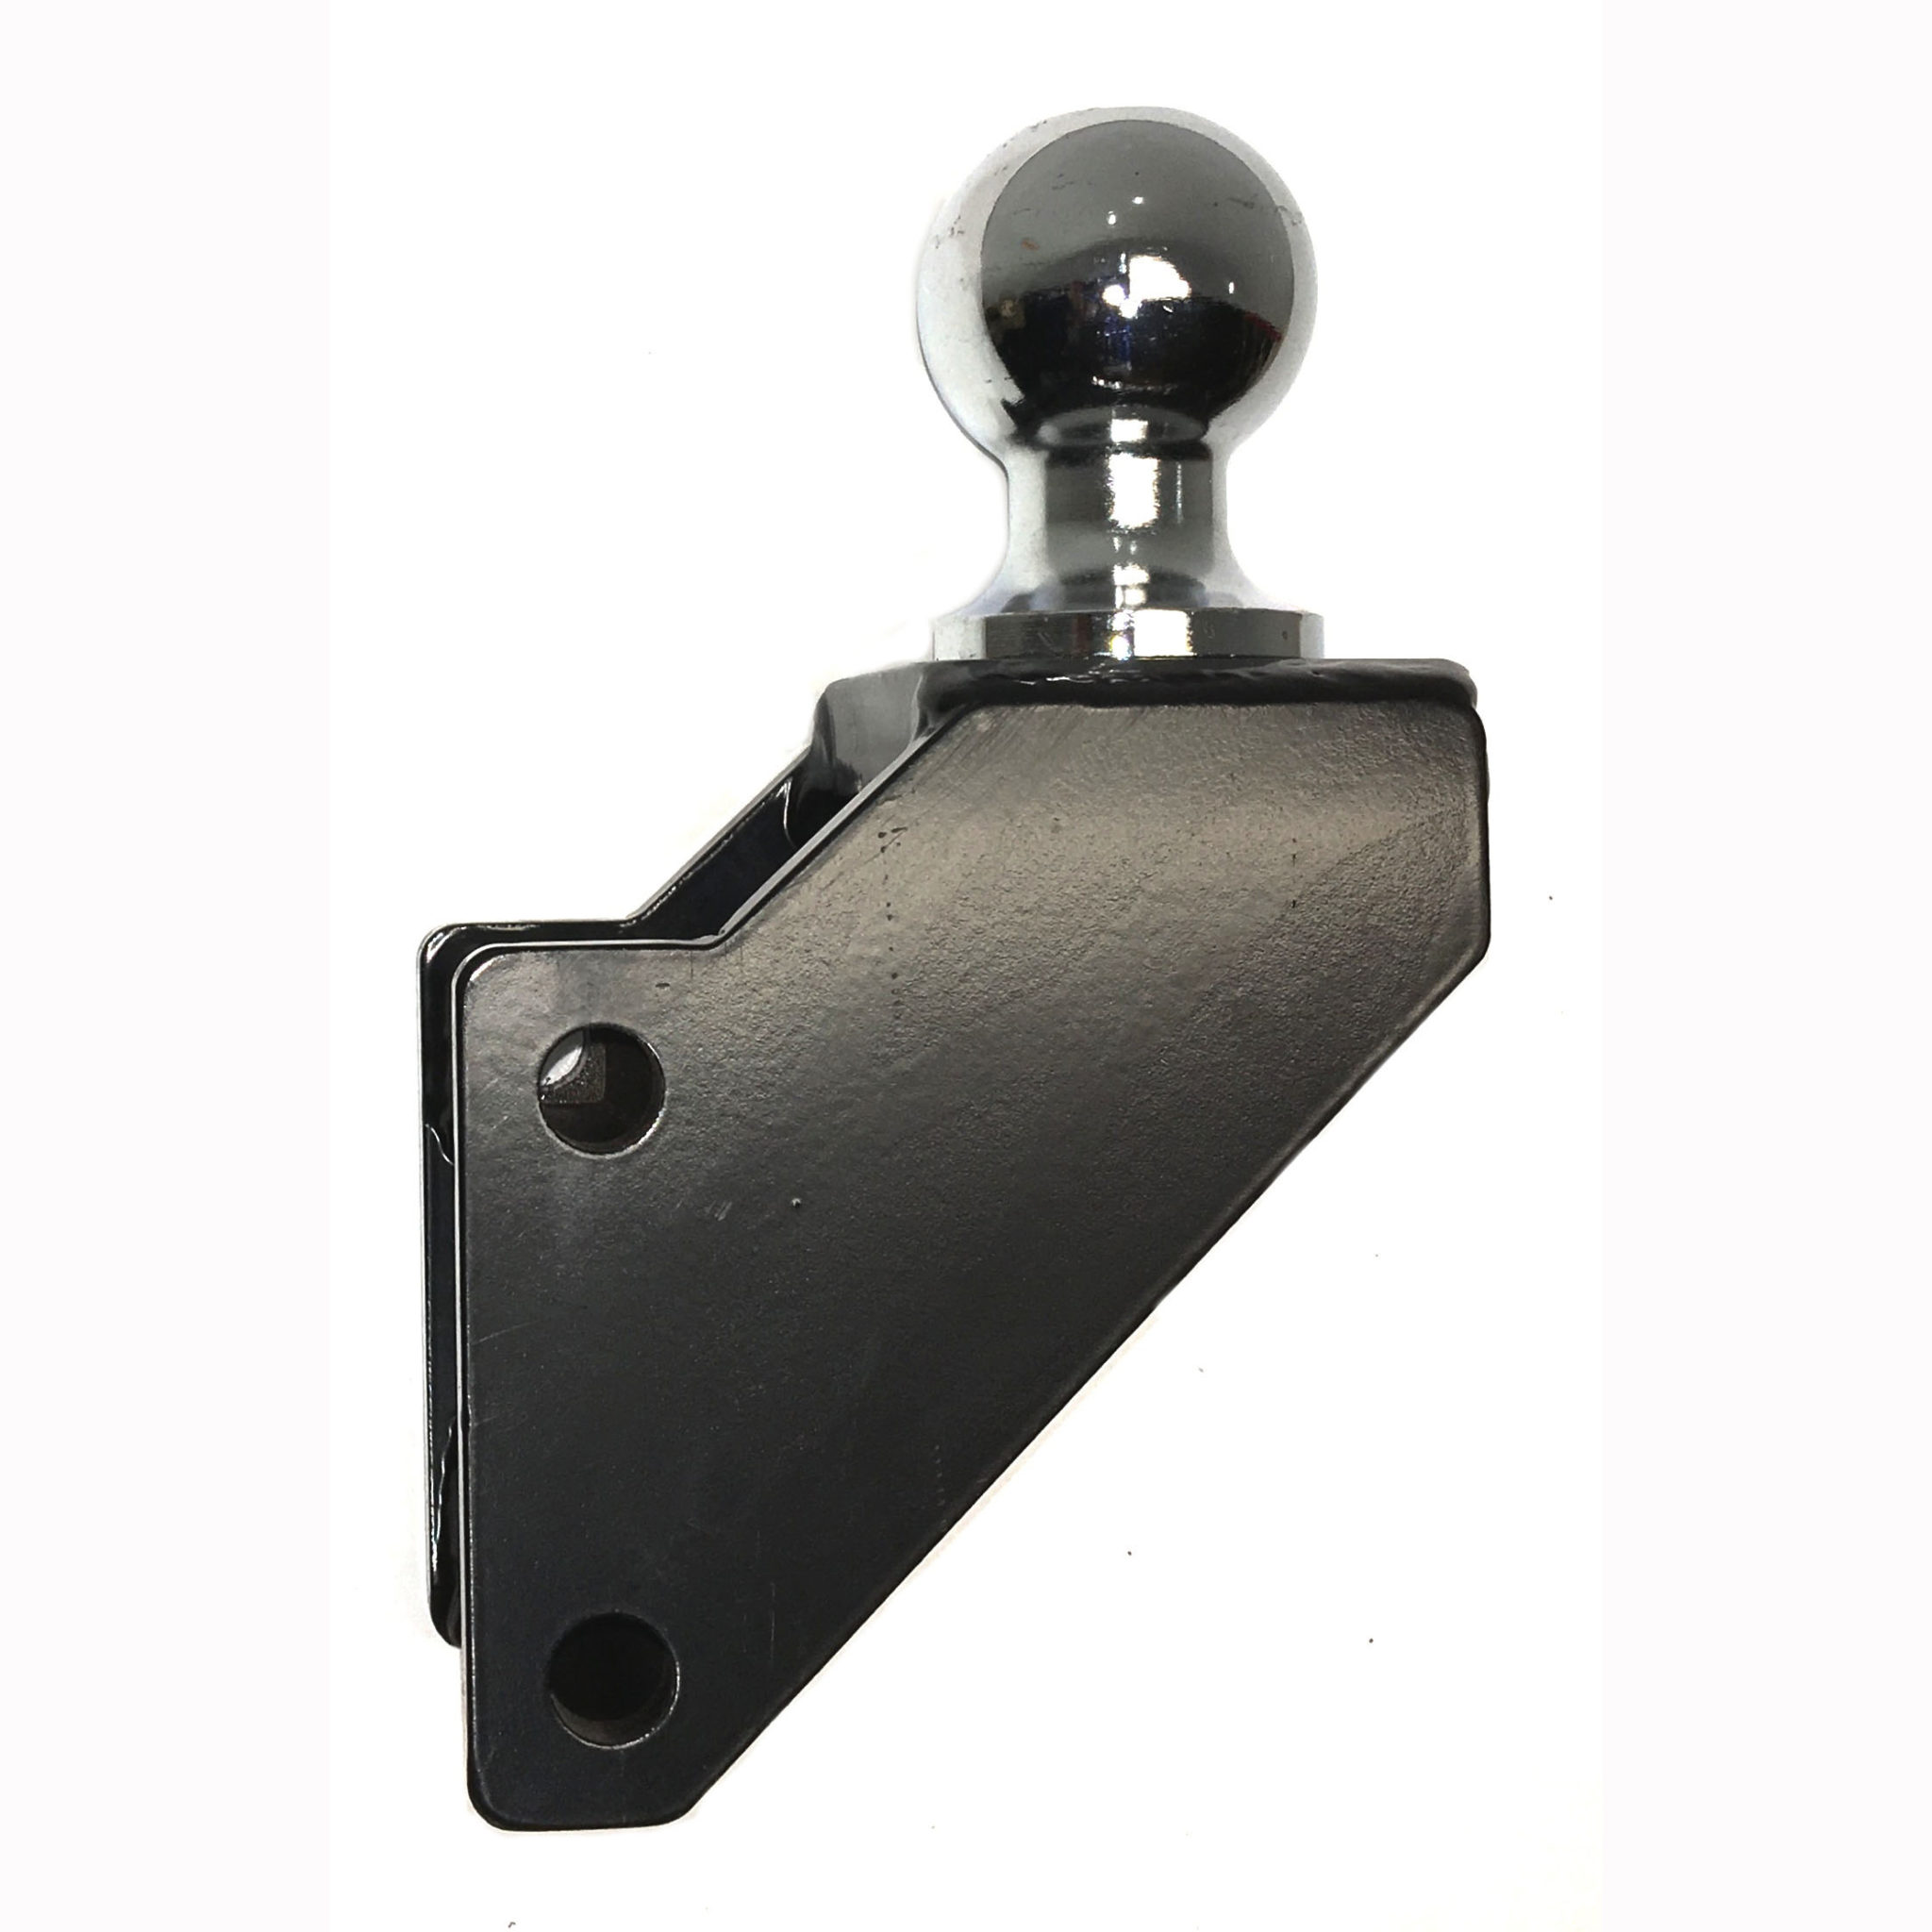 Shocker Raised Ball Mount Attachment 2 Rise to 2 Drop Includes 2-5/16 Ball 